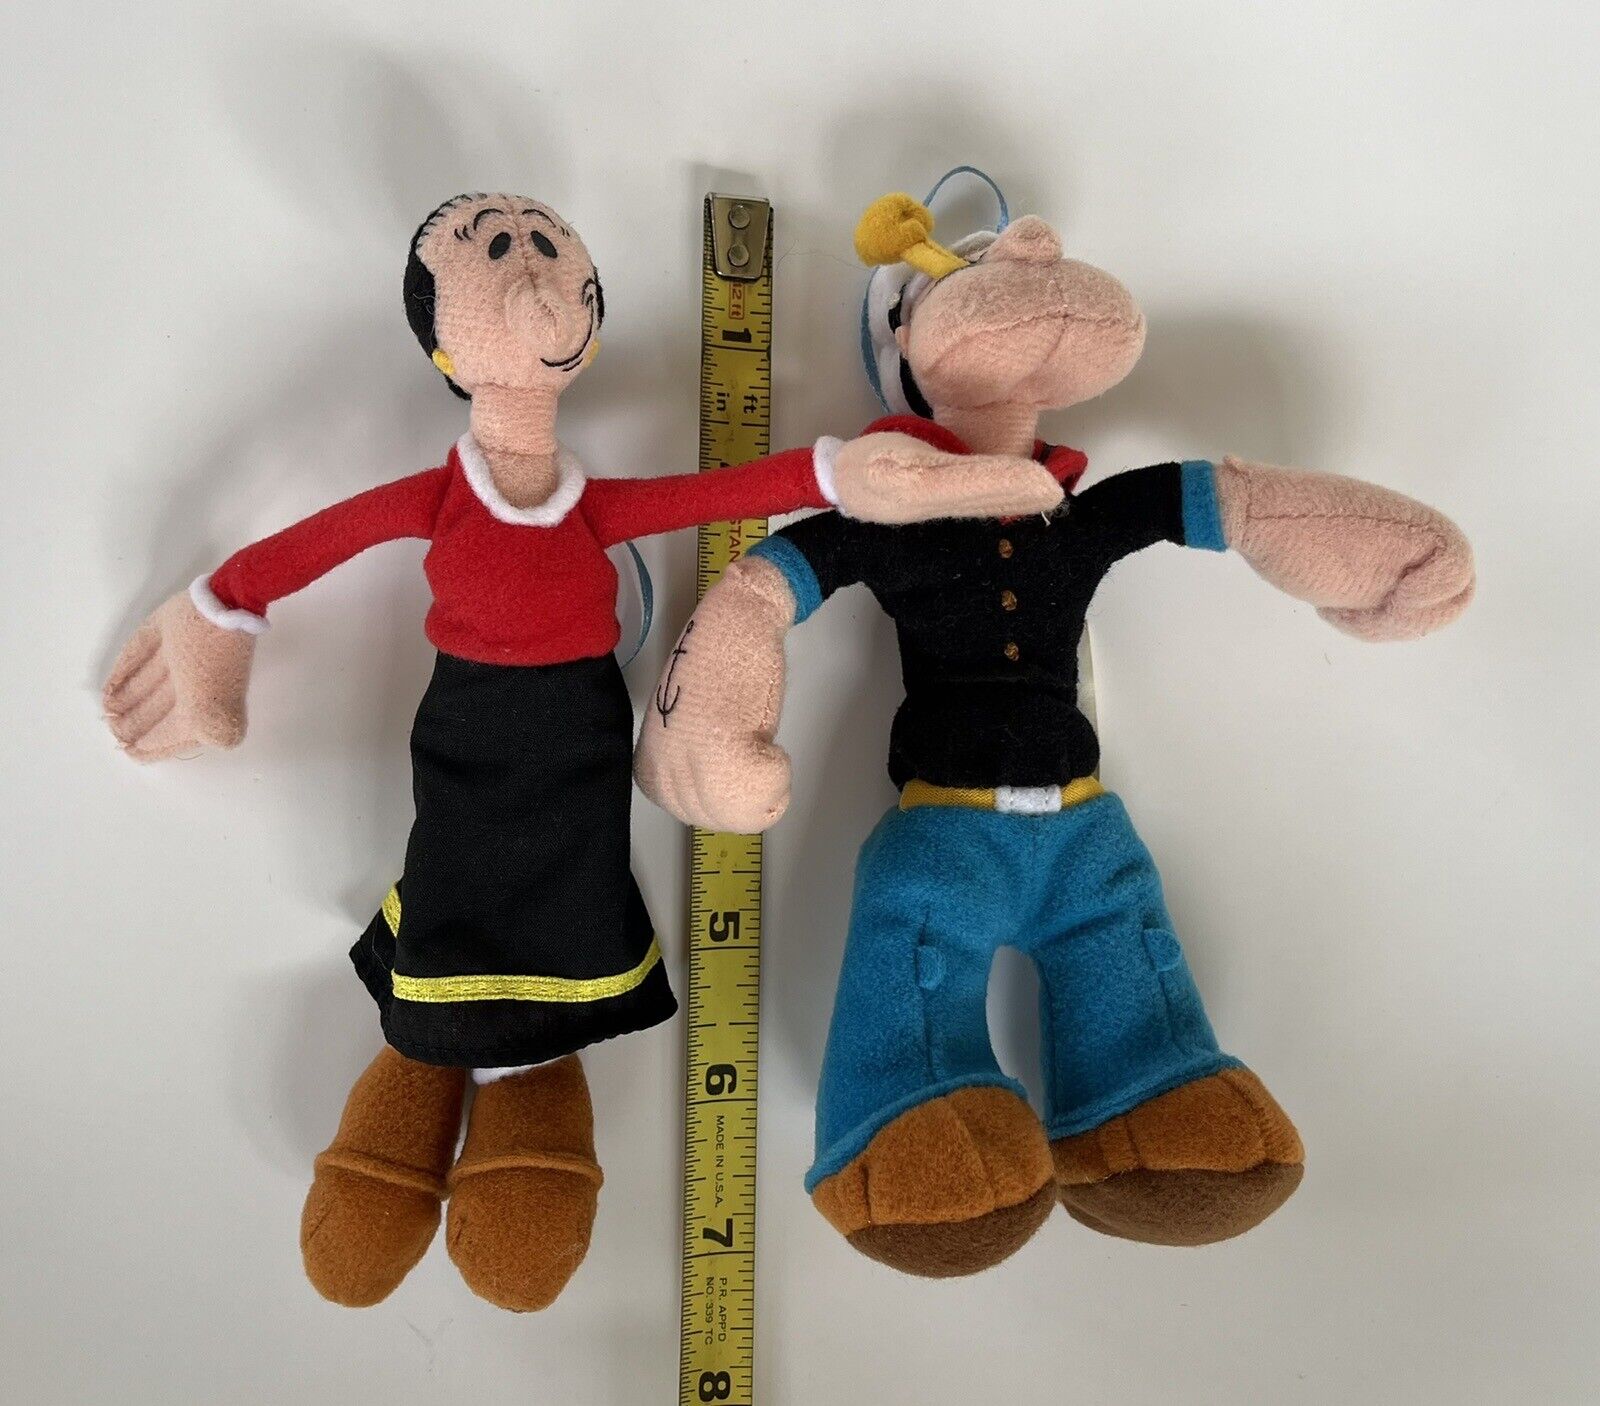 VINTAGE POPEYE AND OLIVE OYL  7 1/2 PLUSH DOLLS WITH RIBBON ATTACHED 2002.